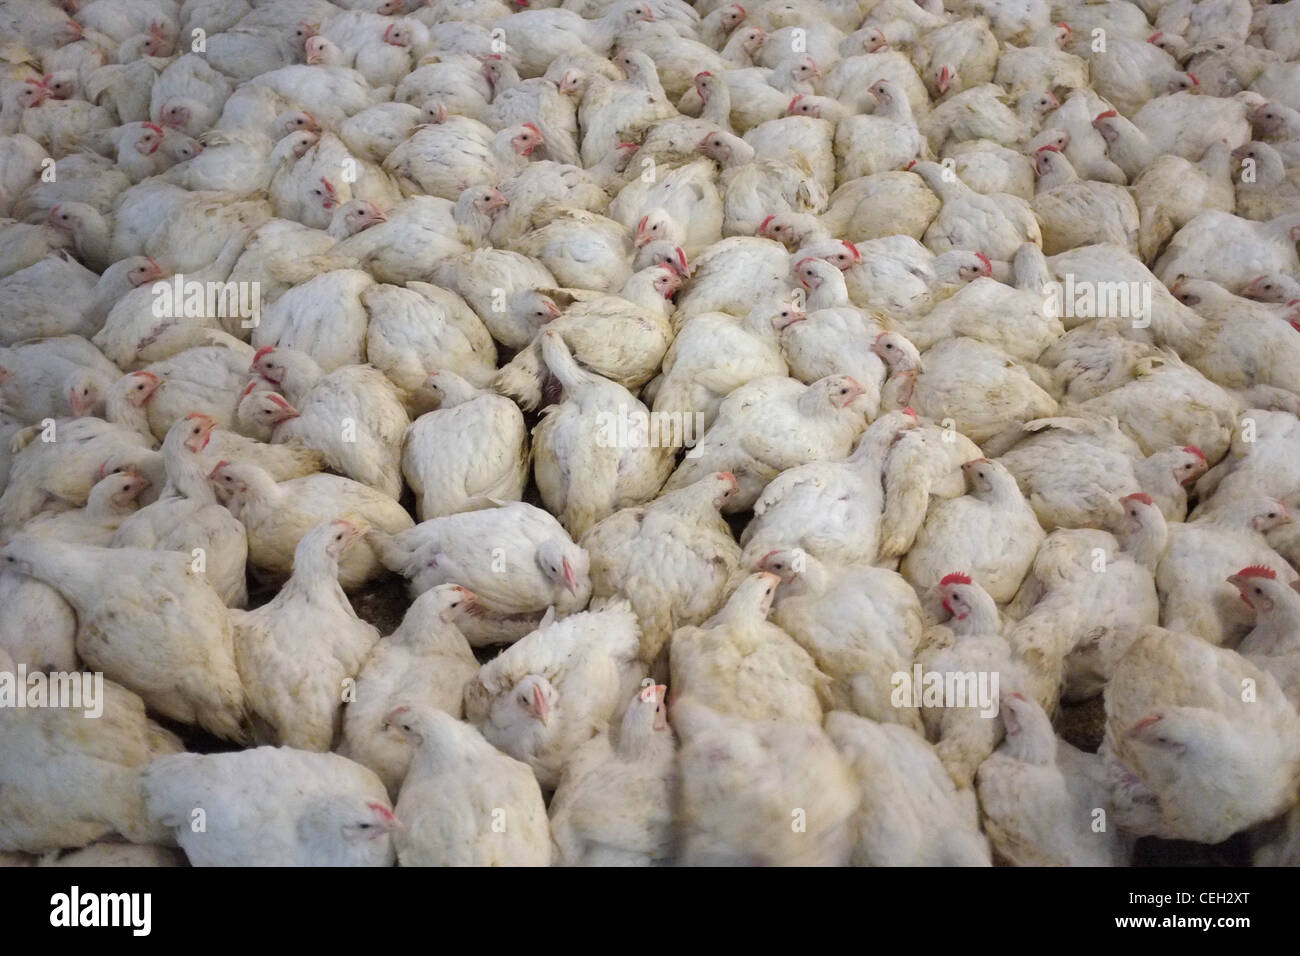 Chickens for meat in an intensive farming environment Stock Photo